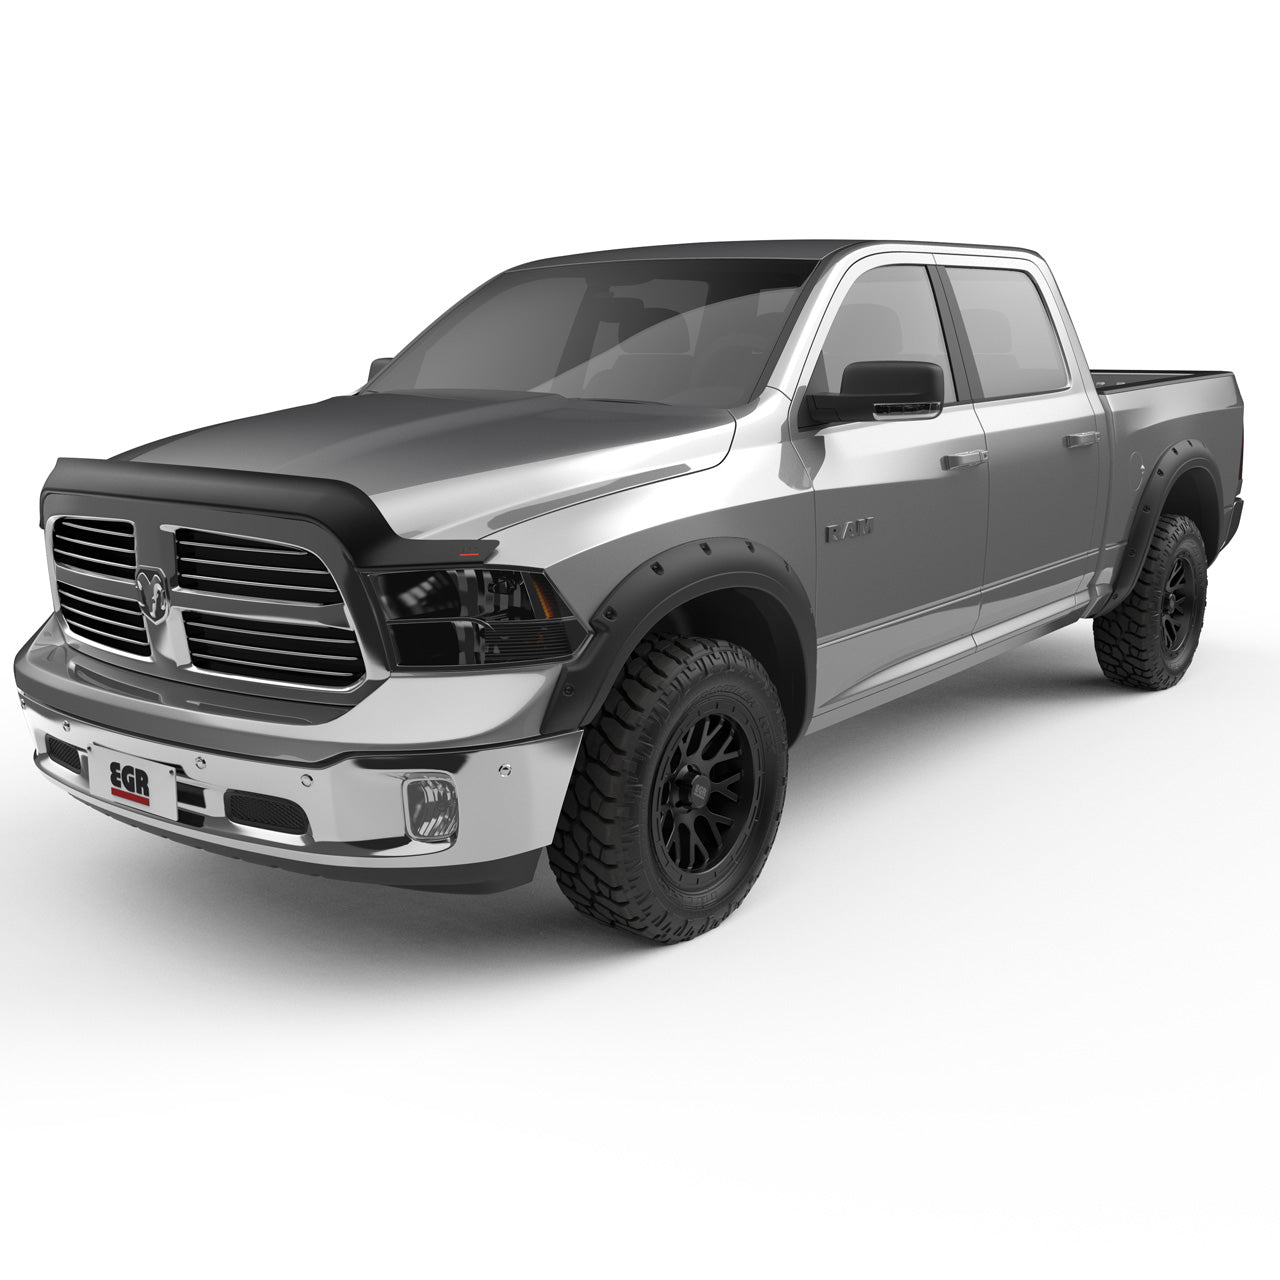 EGR Traditional Bolt-on look Fender Flares with Black-out - Bolt Kit 09-18 Ram 1500 19-22 Ram 1500 Classic set of 4